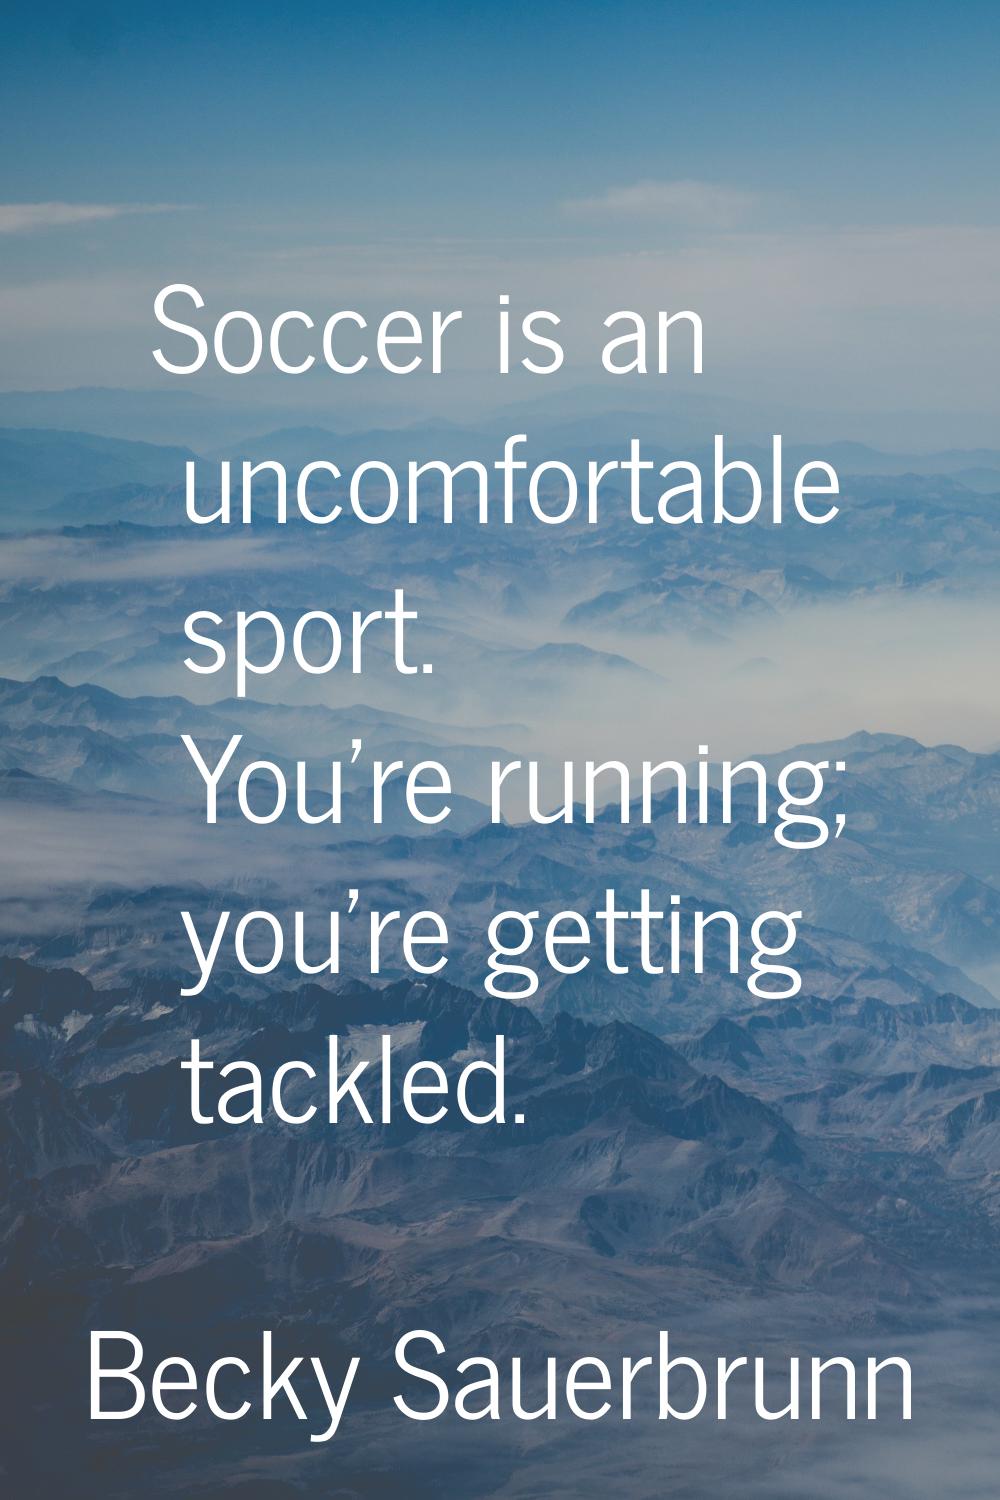 Soccer is an uncomfortable sport. You're running; you're getting tackled.